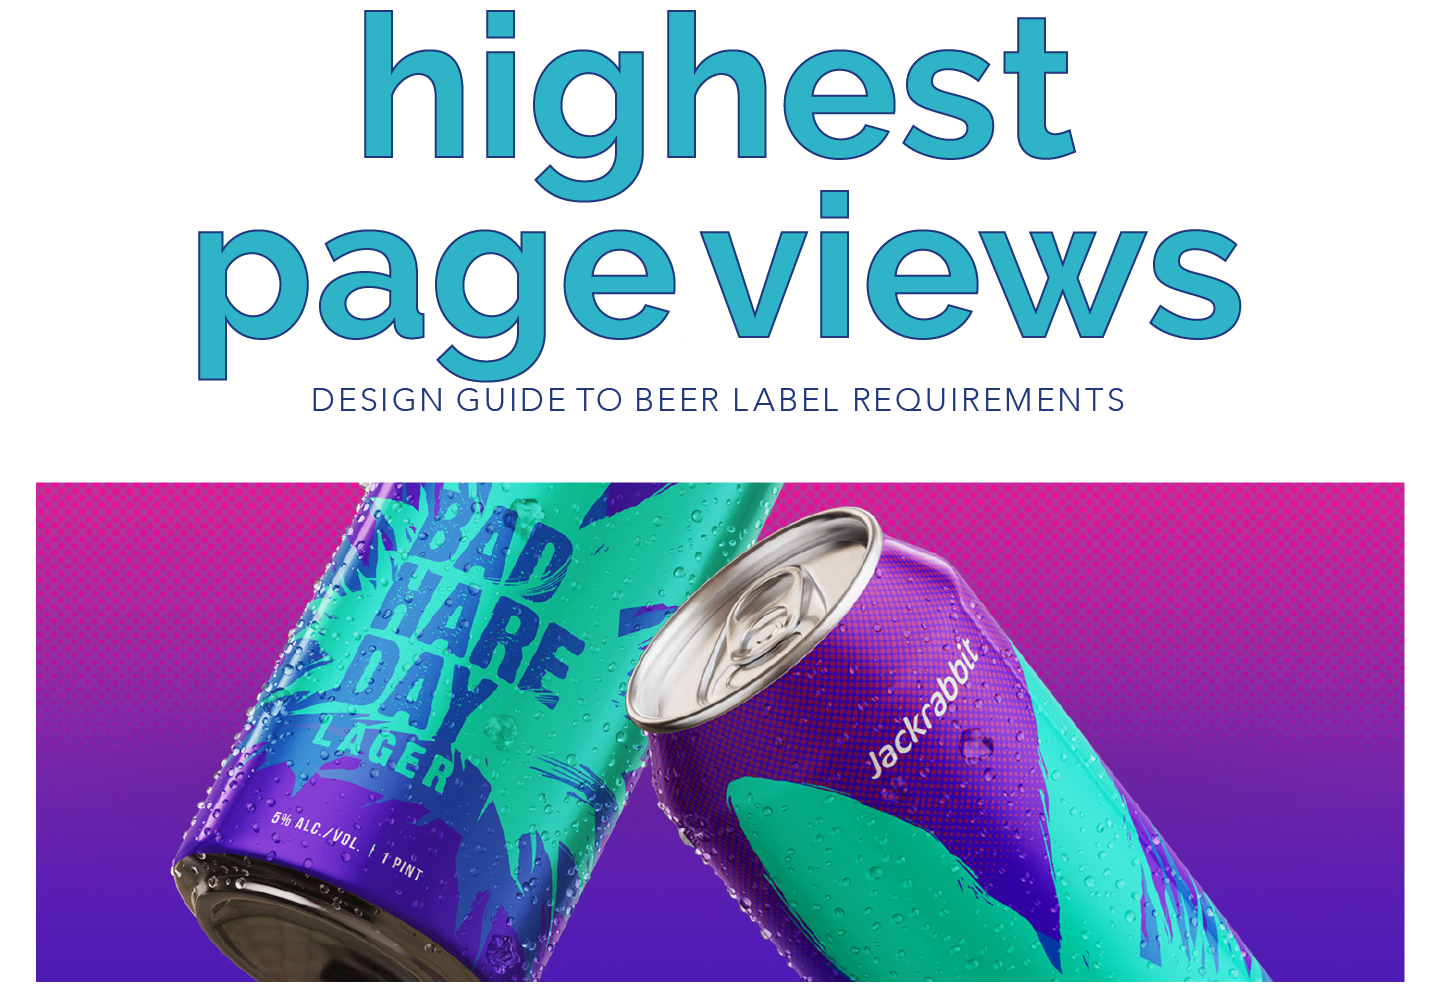 "highest page view design guide to beer label requirements" beer can logo designs "Bad Hare Day Lager"